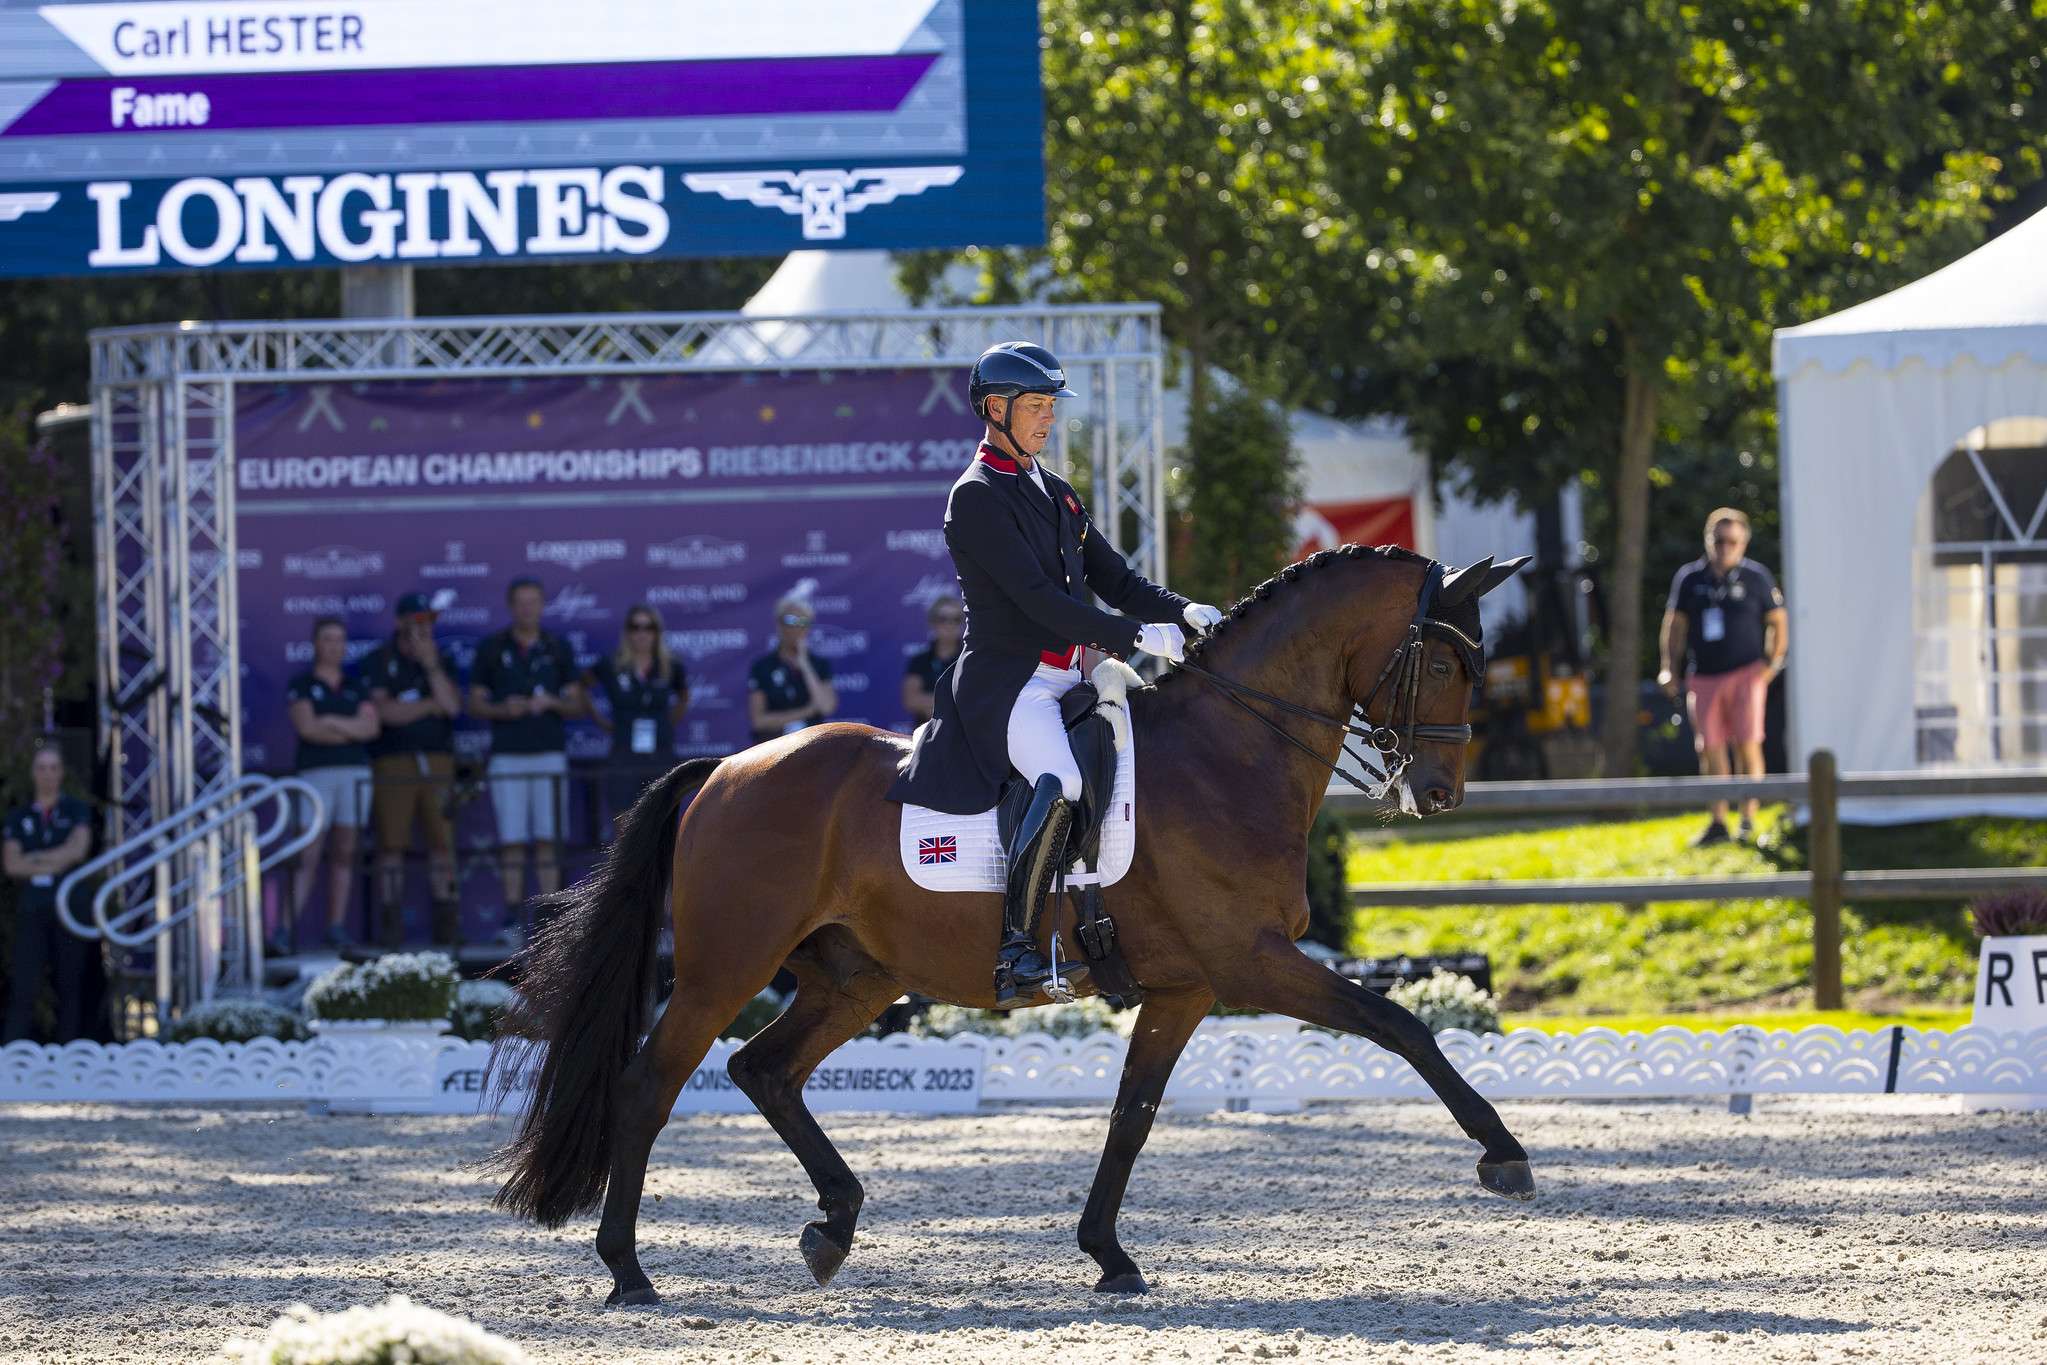 Carl Hester (GBR) riding Fame in the Grand Prix Dressage - Team Competition - at the FEI Dressage European Championship Riesenbeck 2023 Copyright ©FEI/Leanjo de Koster